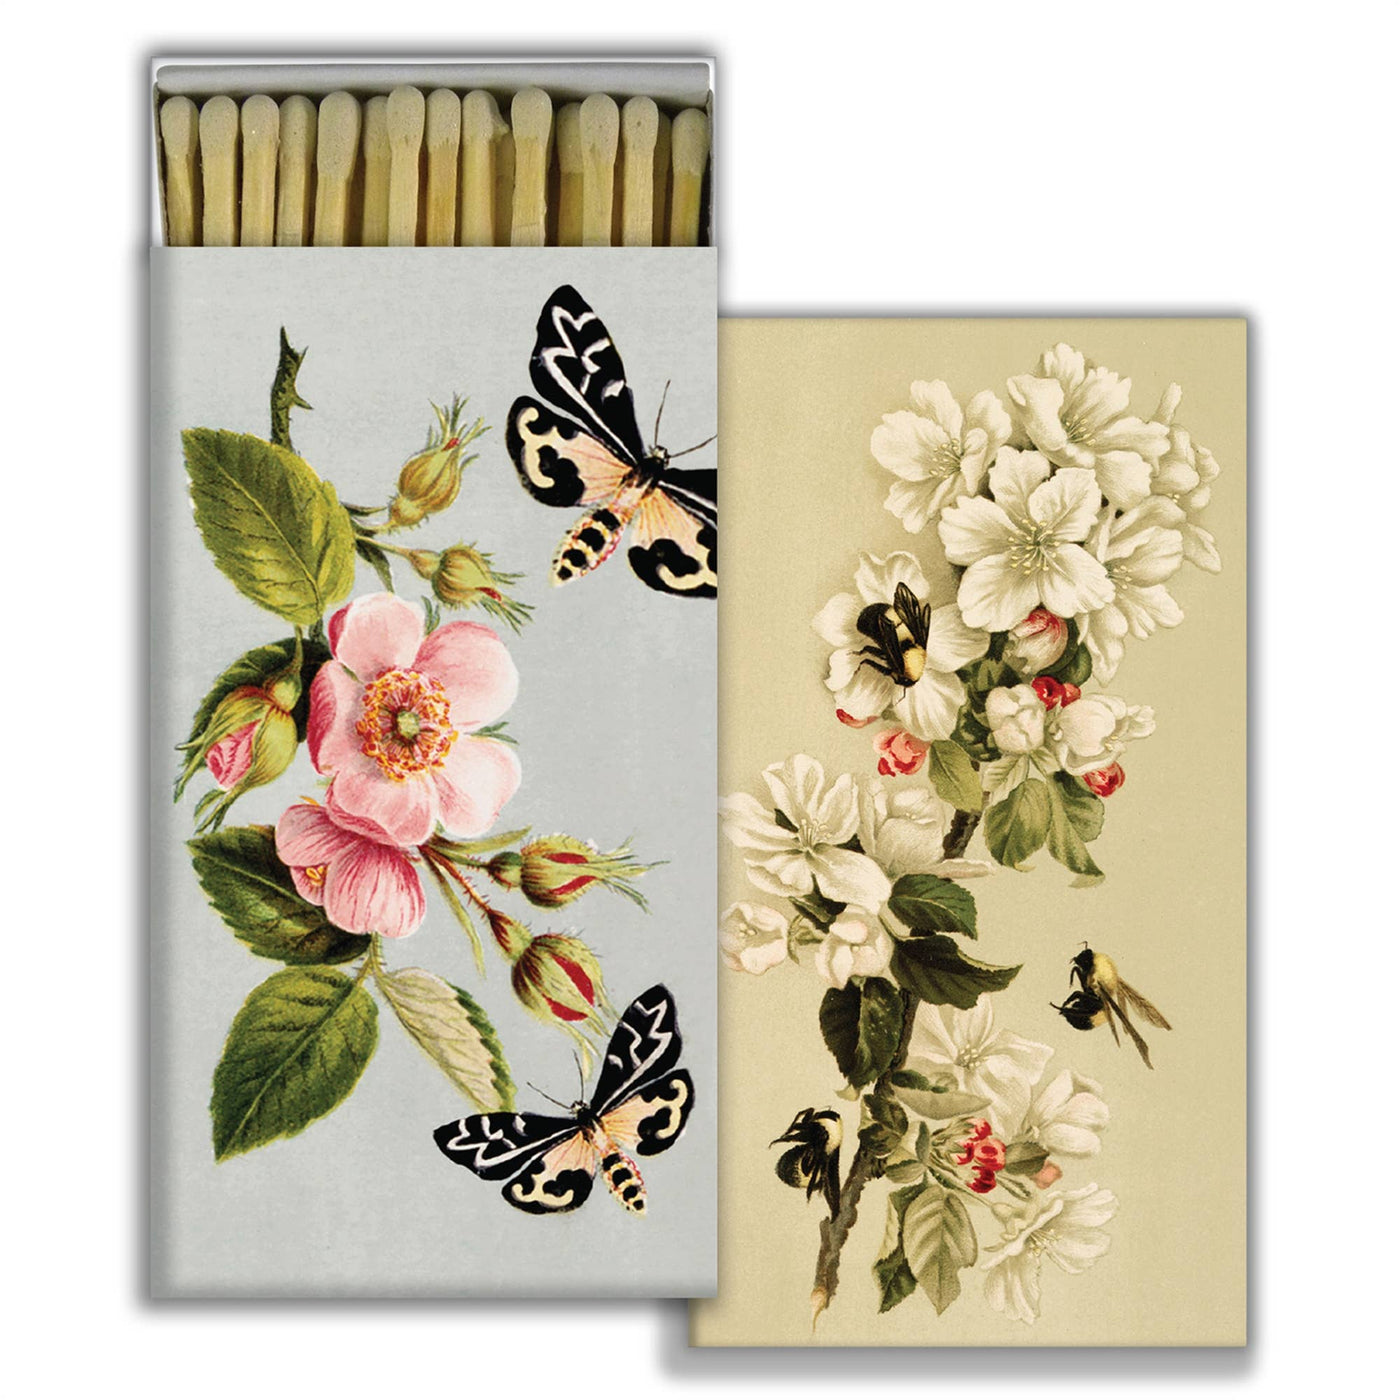 Matches - Insects and Floral